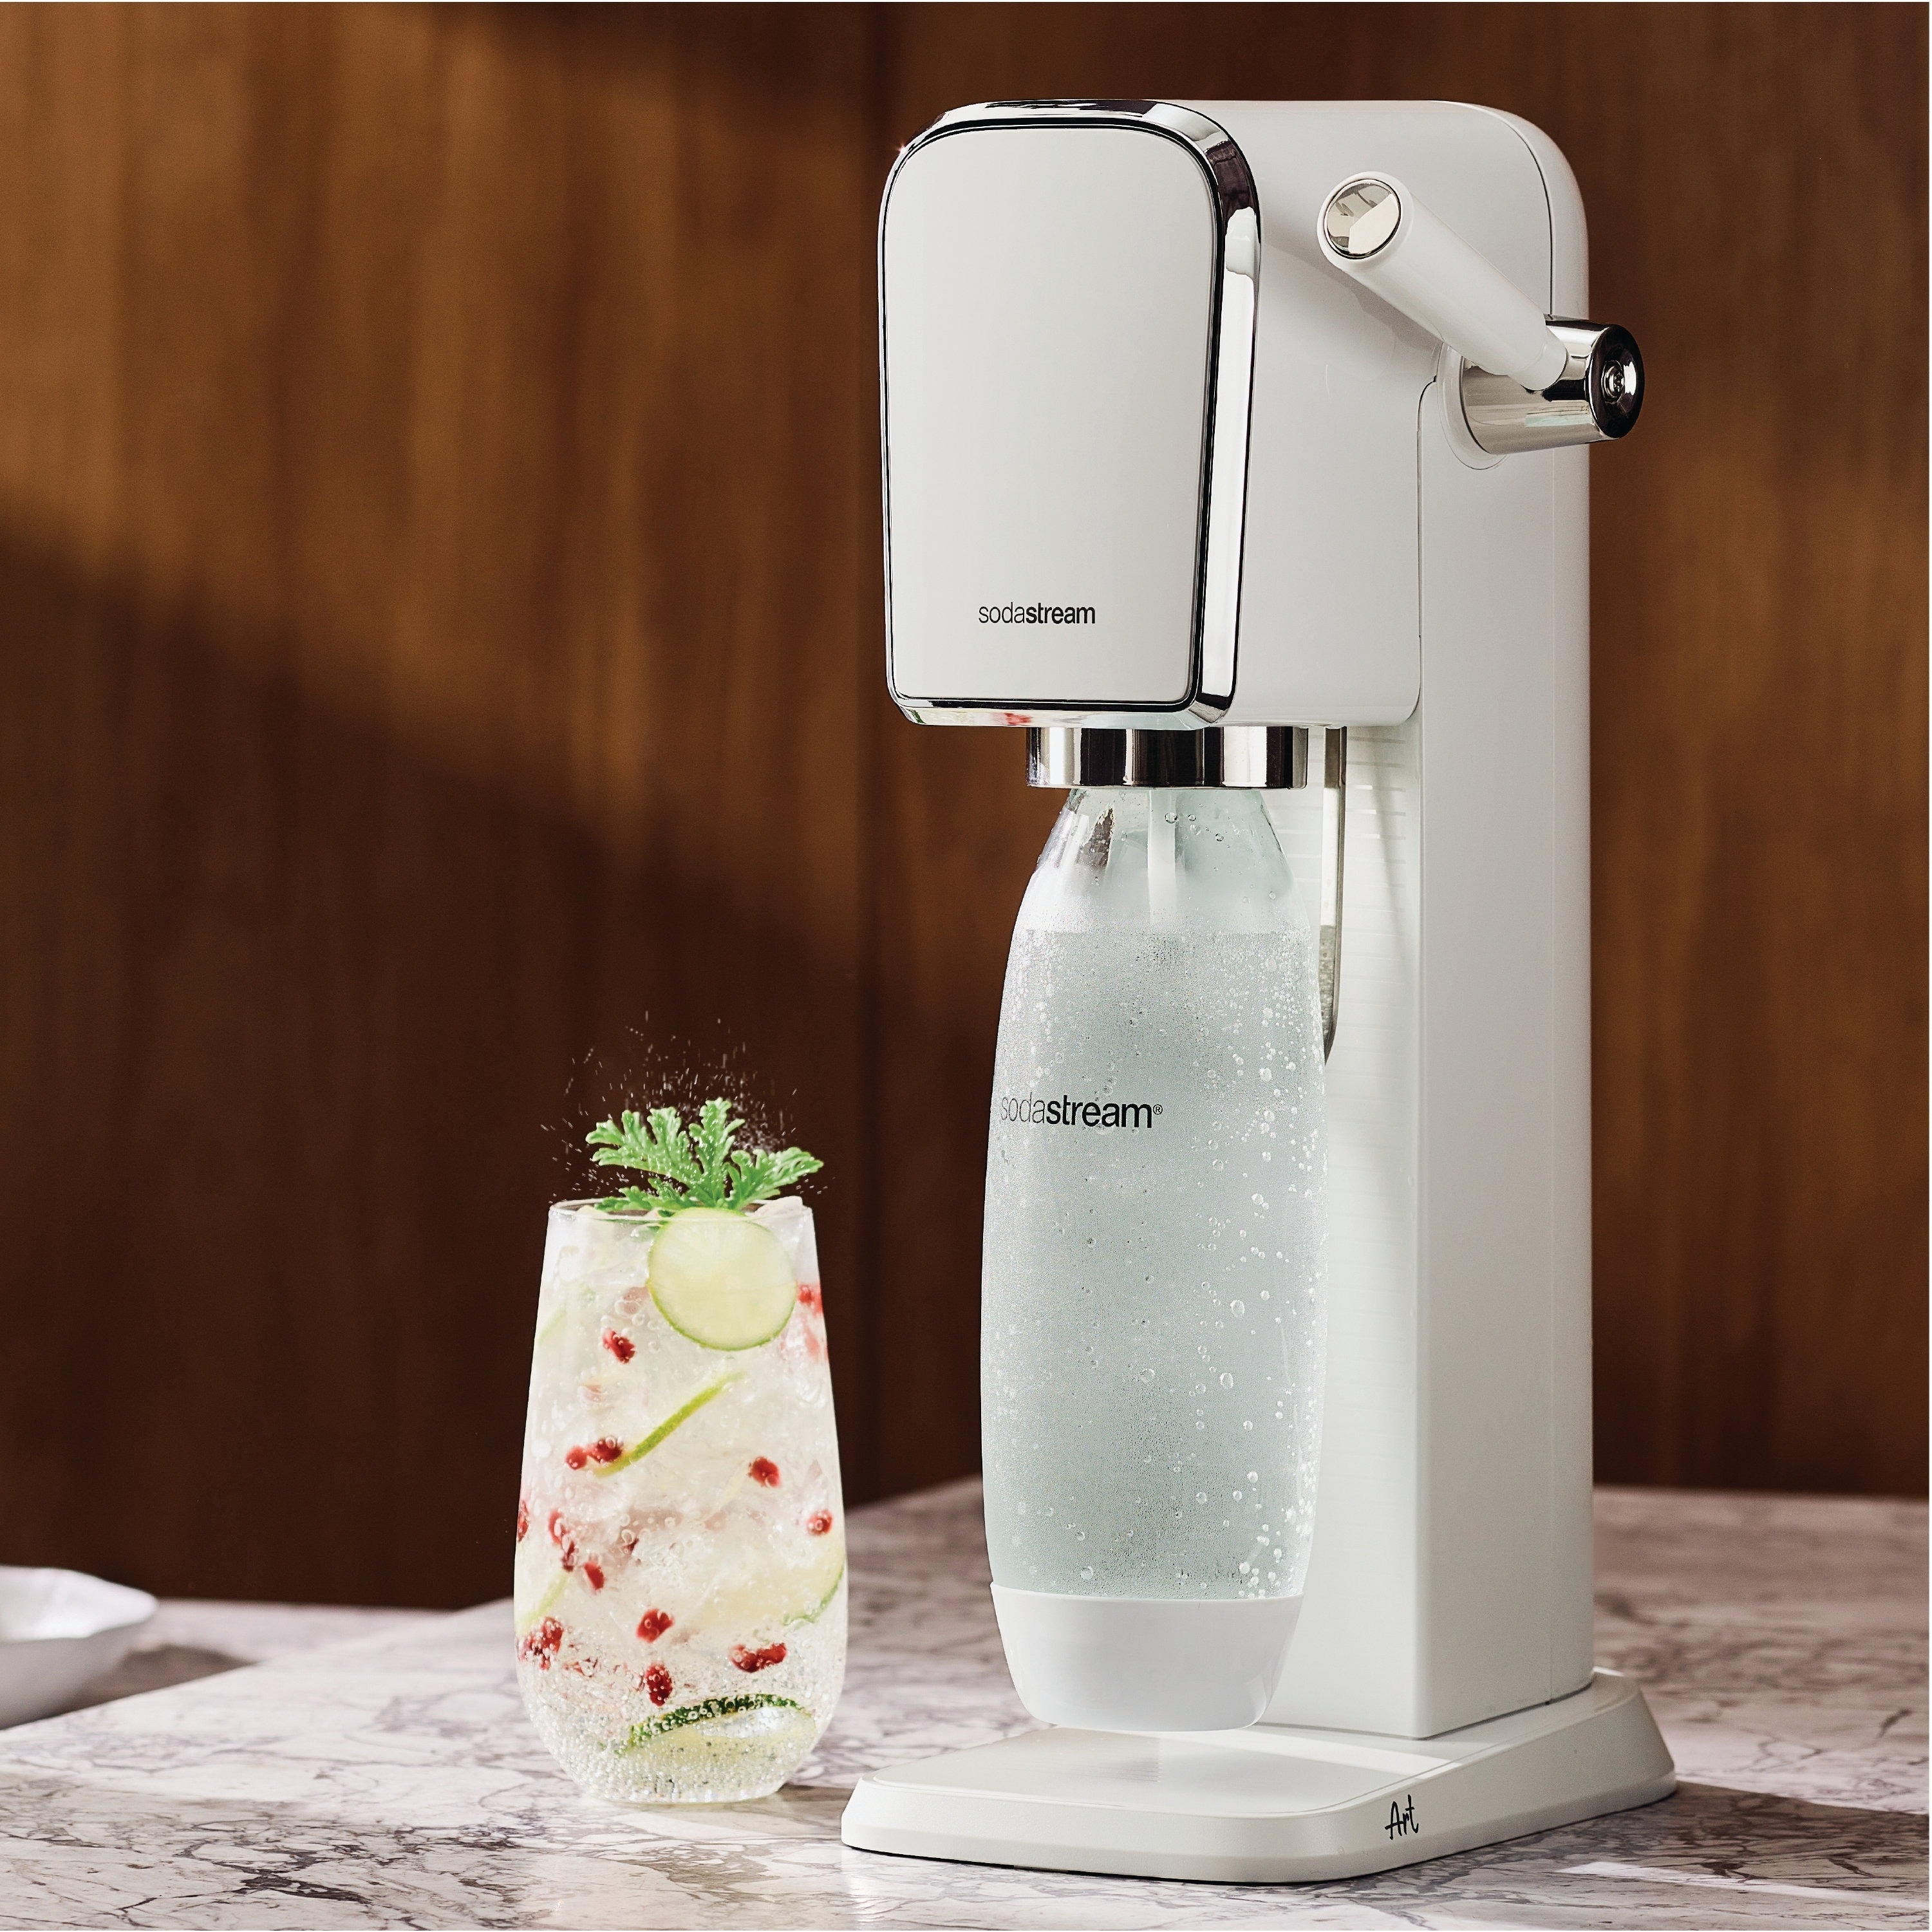 the SodaStream on a counter